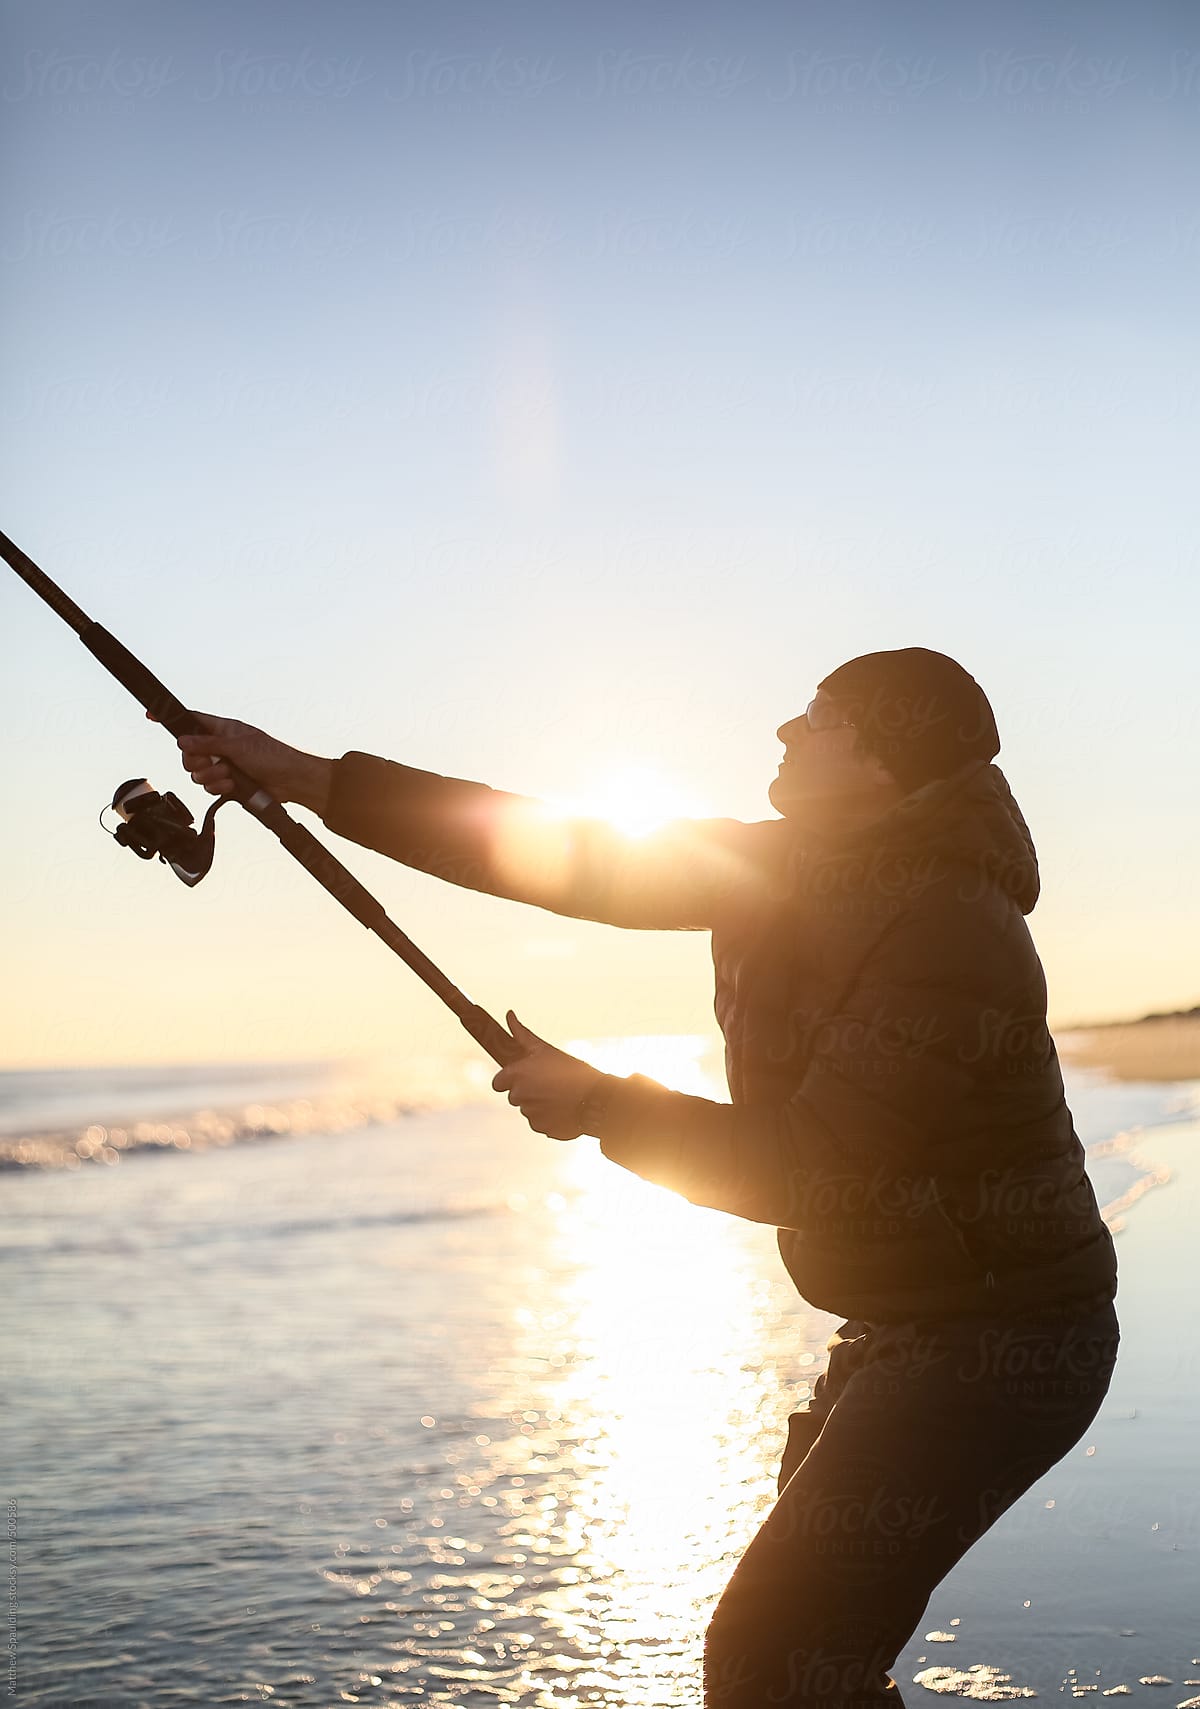 Person Casting Fishing Pole To Catch Surf Fish On Atlantic Ocean